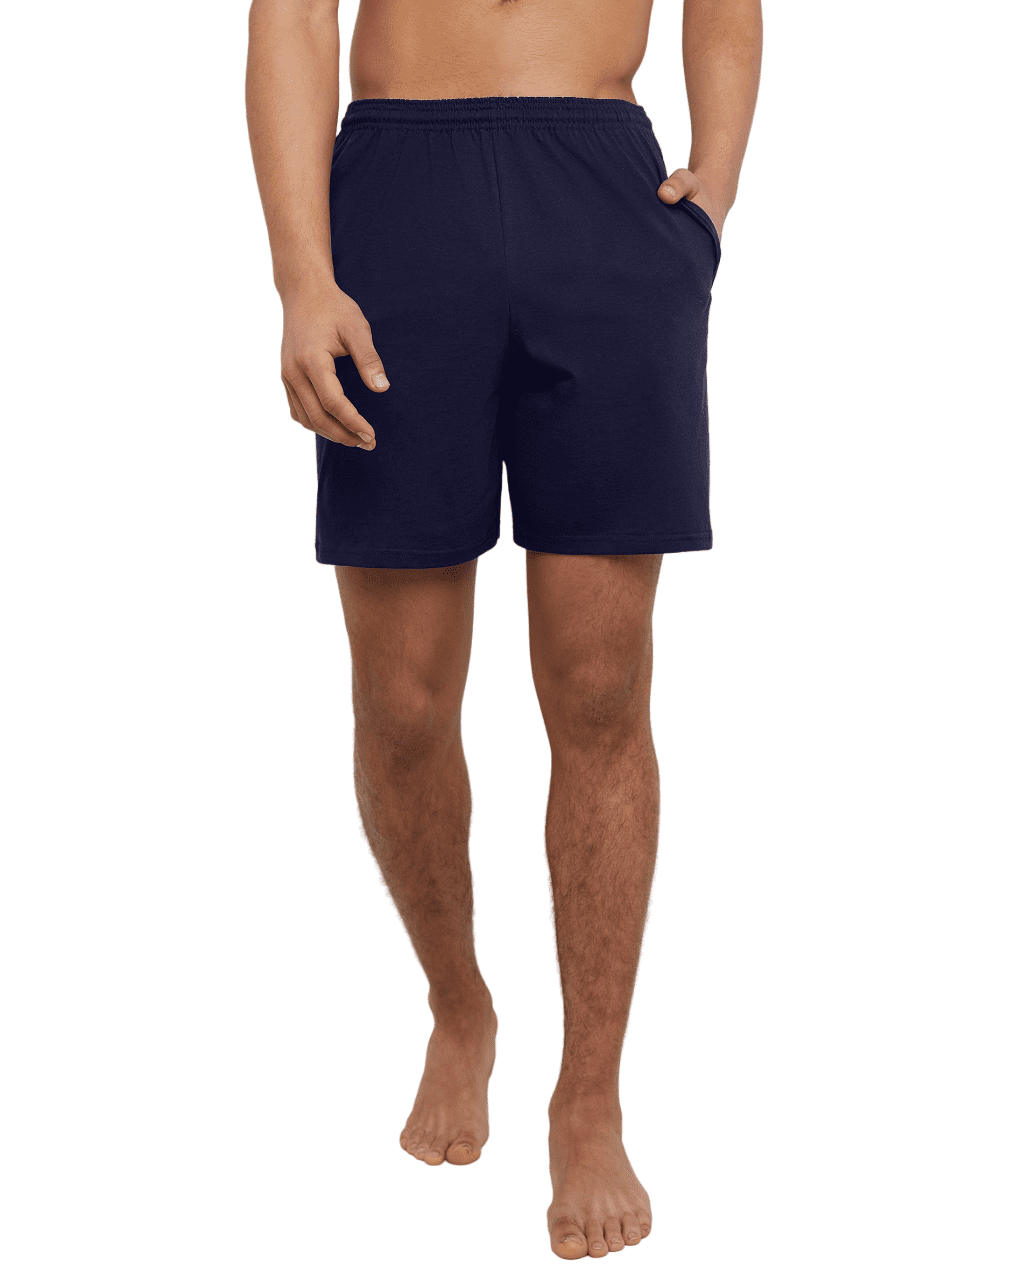 Hanes Essentials Mens Cotton 7.5" Shorts With Pockets